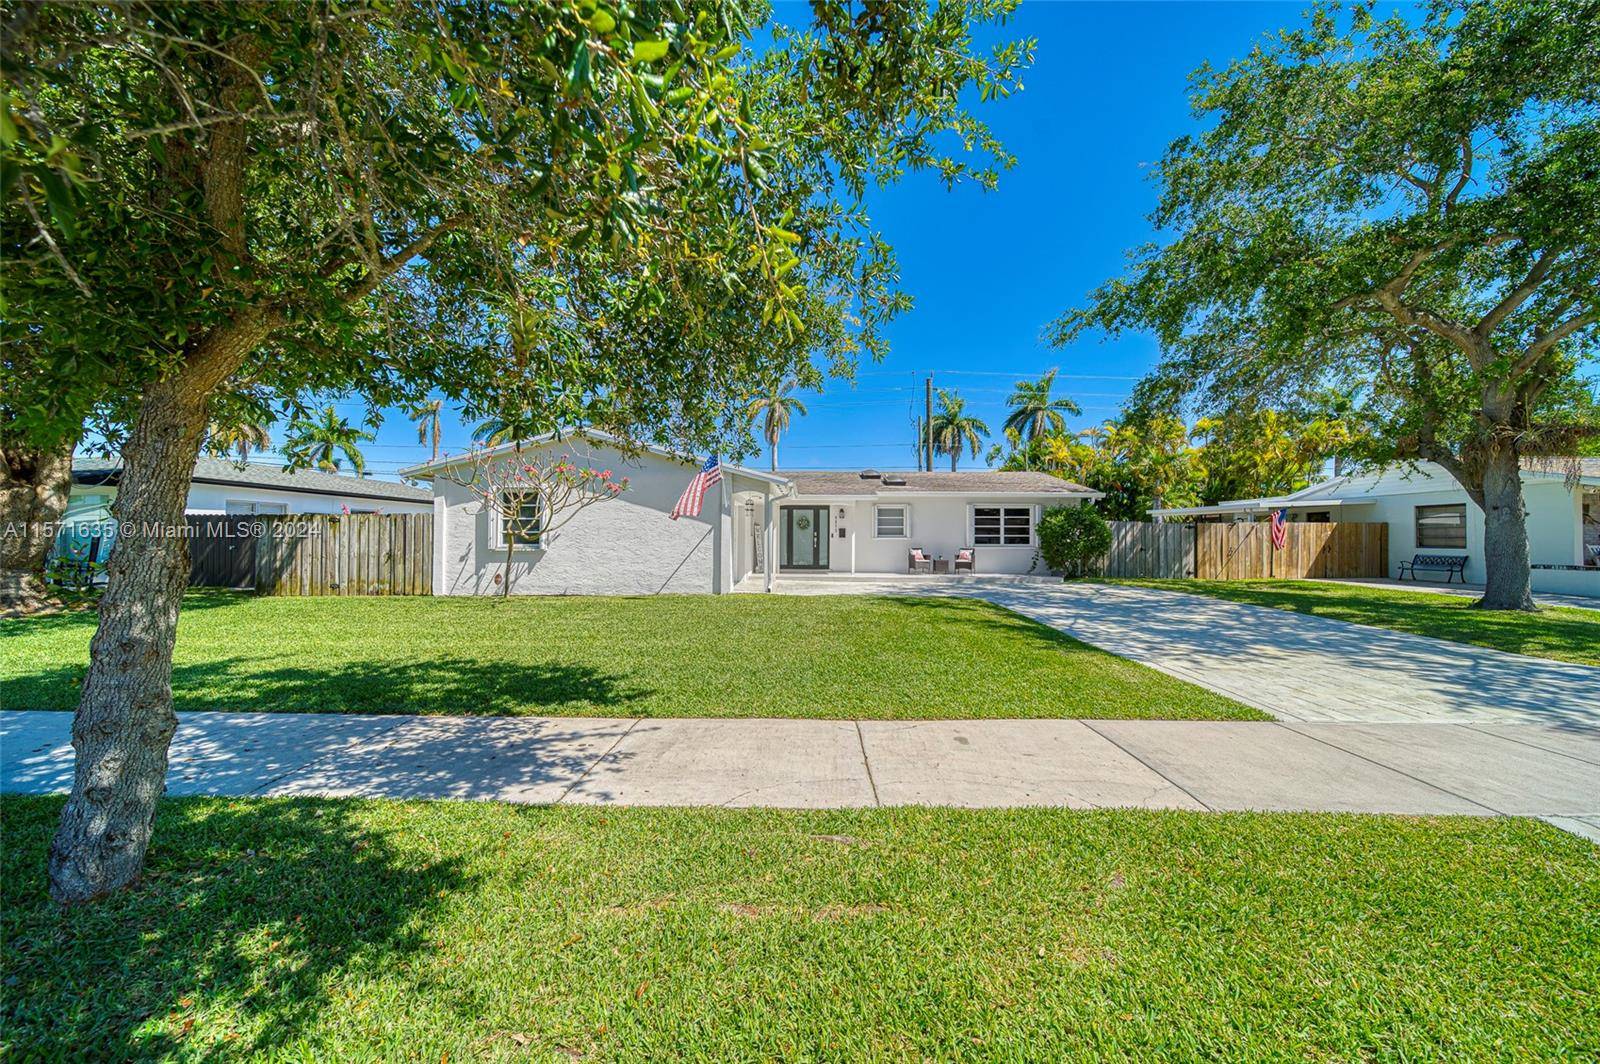 Beautifully remodeled home boasting 4 bedrooms 2 bathrooms with a 1 car garage.